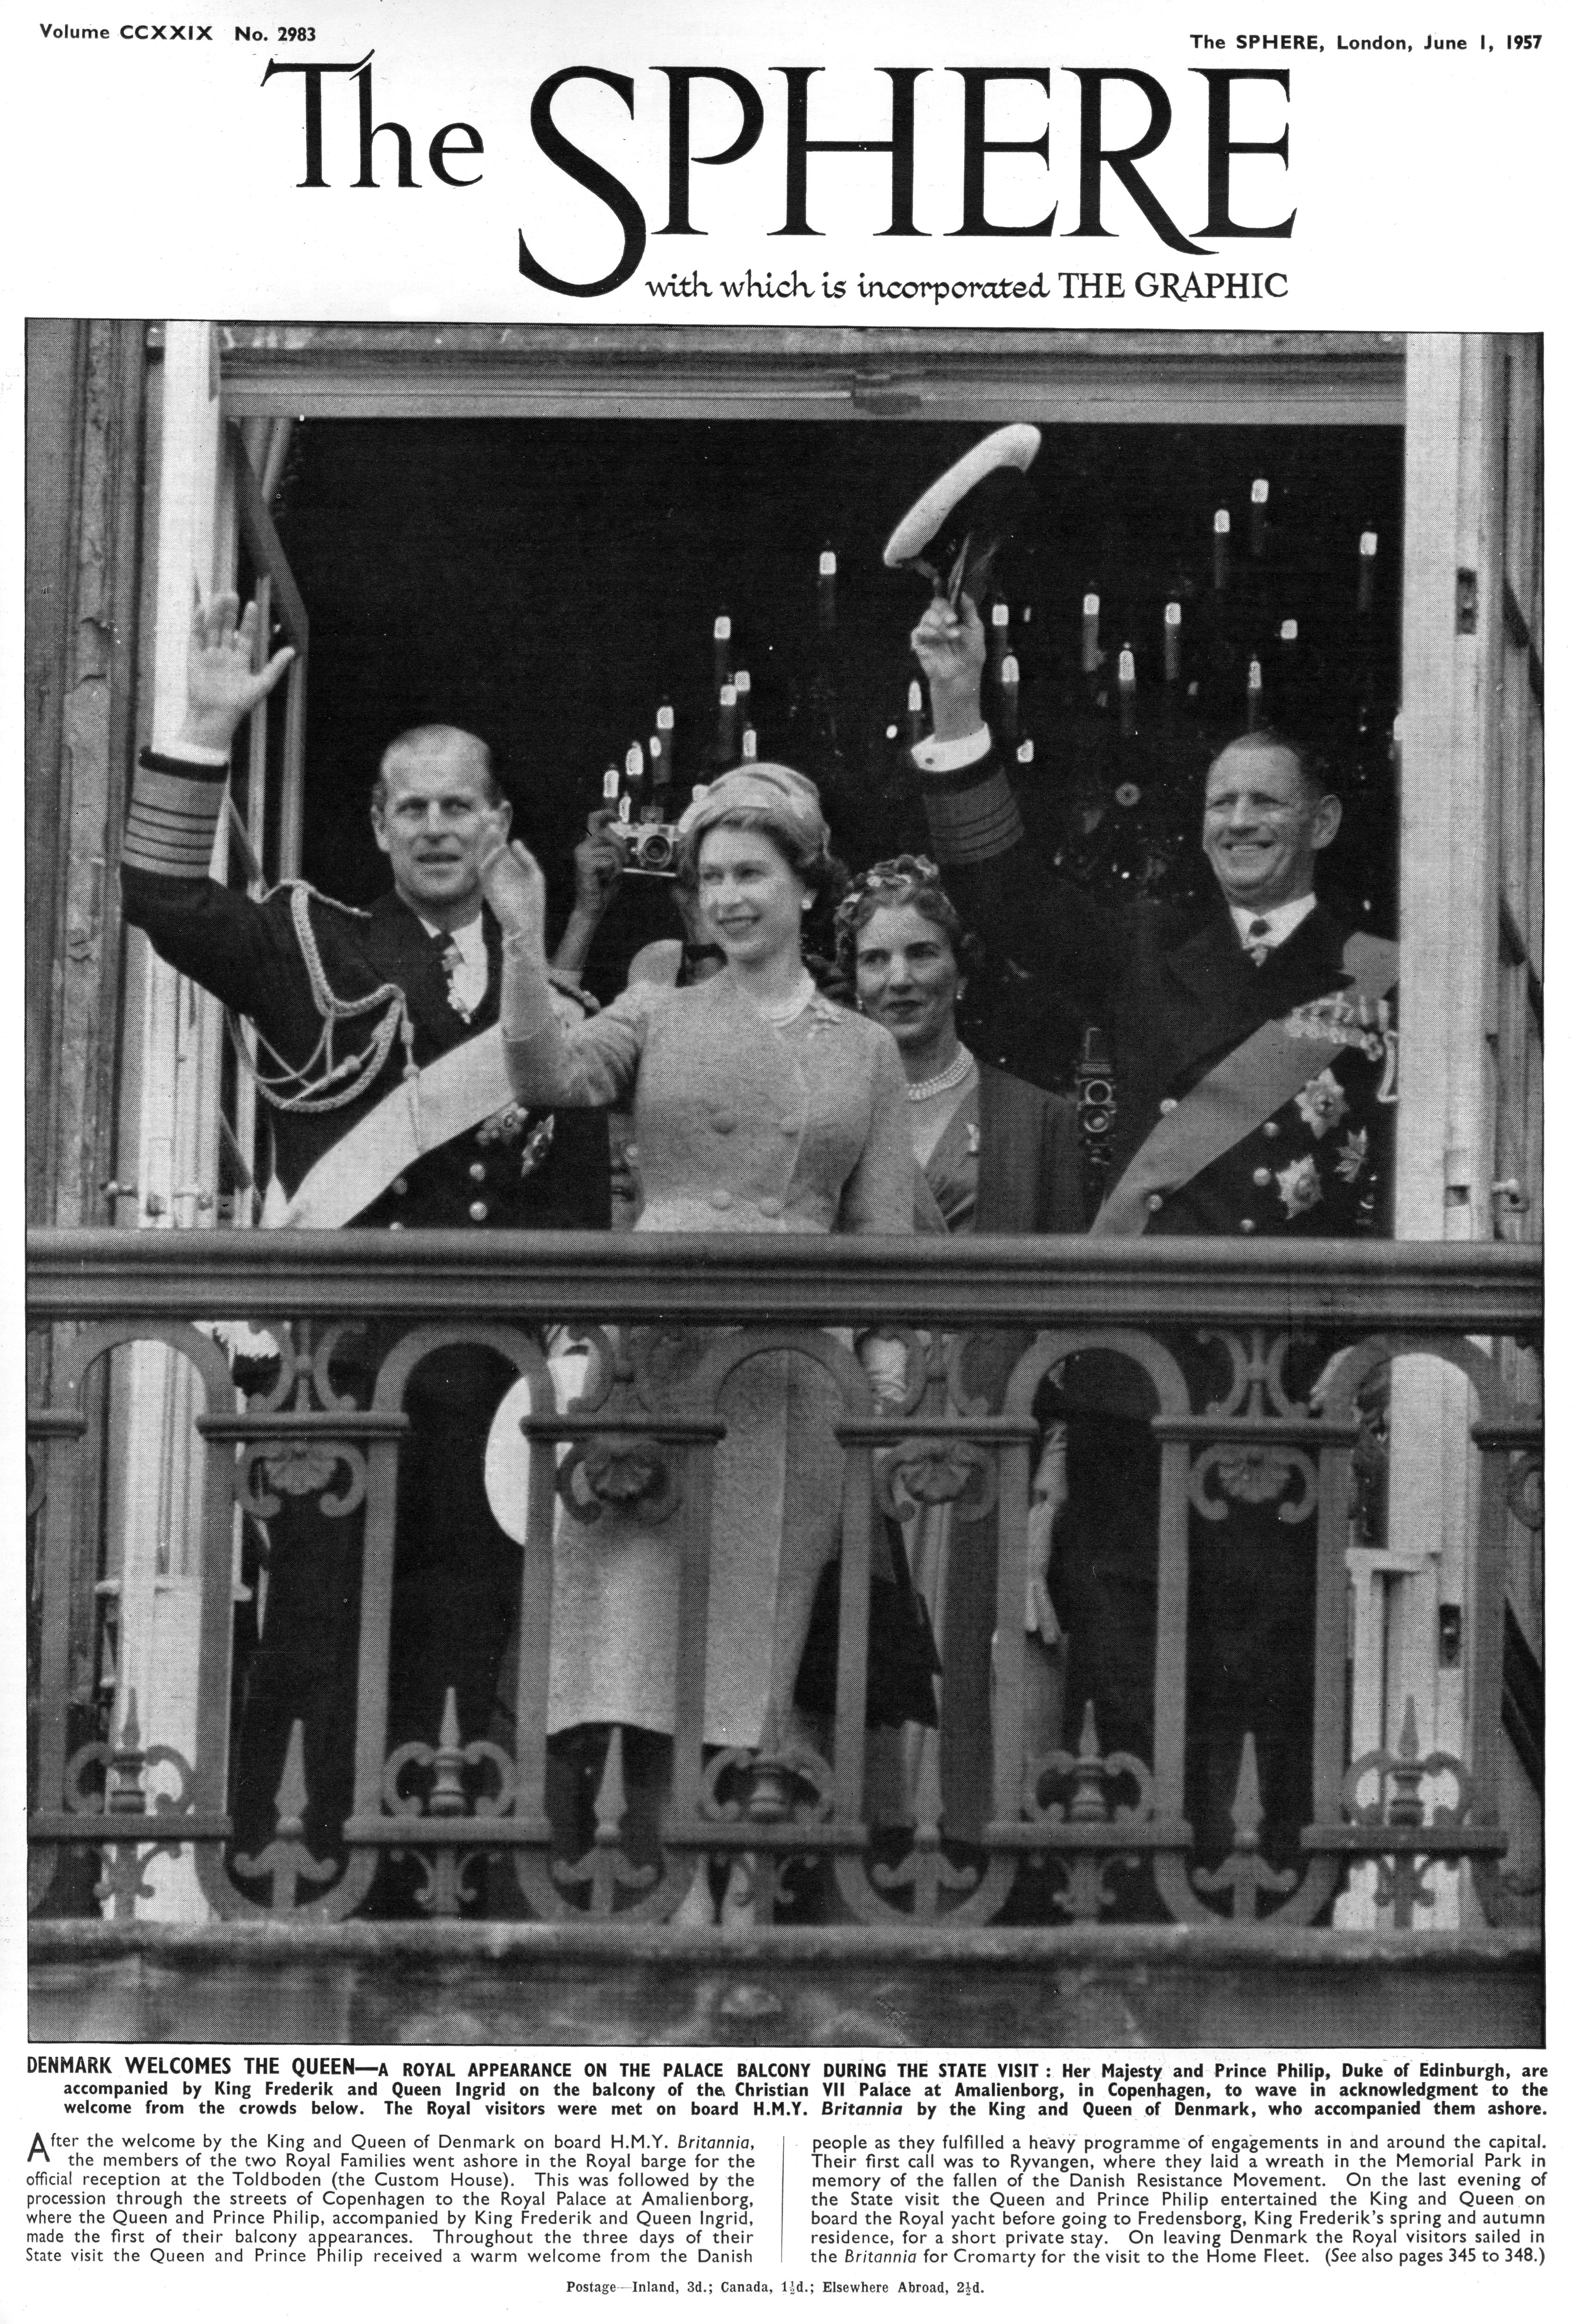 First Anniversary The Queen’s Death - A royal appearance on the Christian VII Palace balcony in Copenhagen, 1957